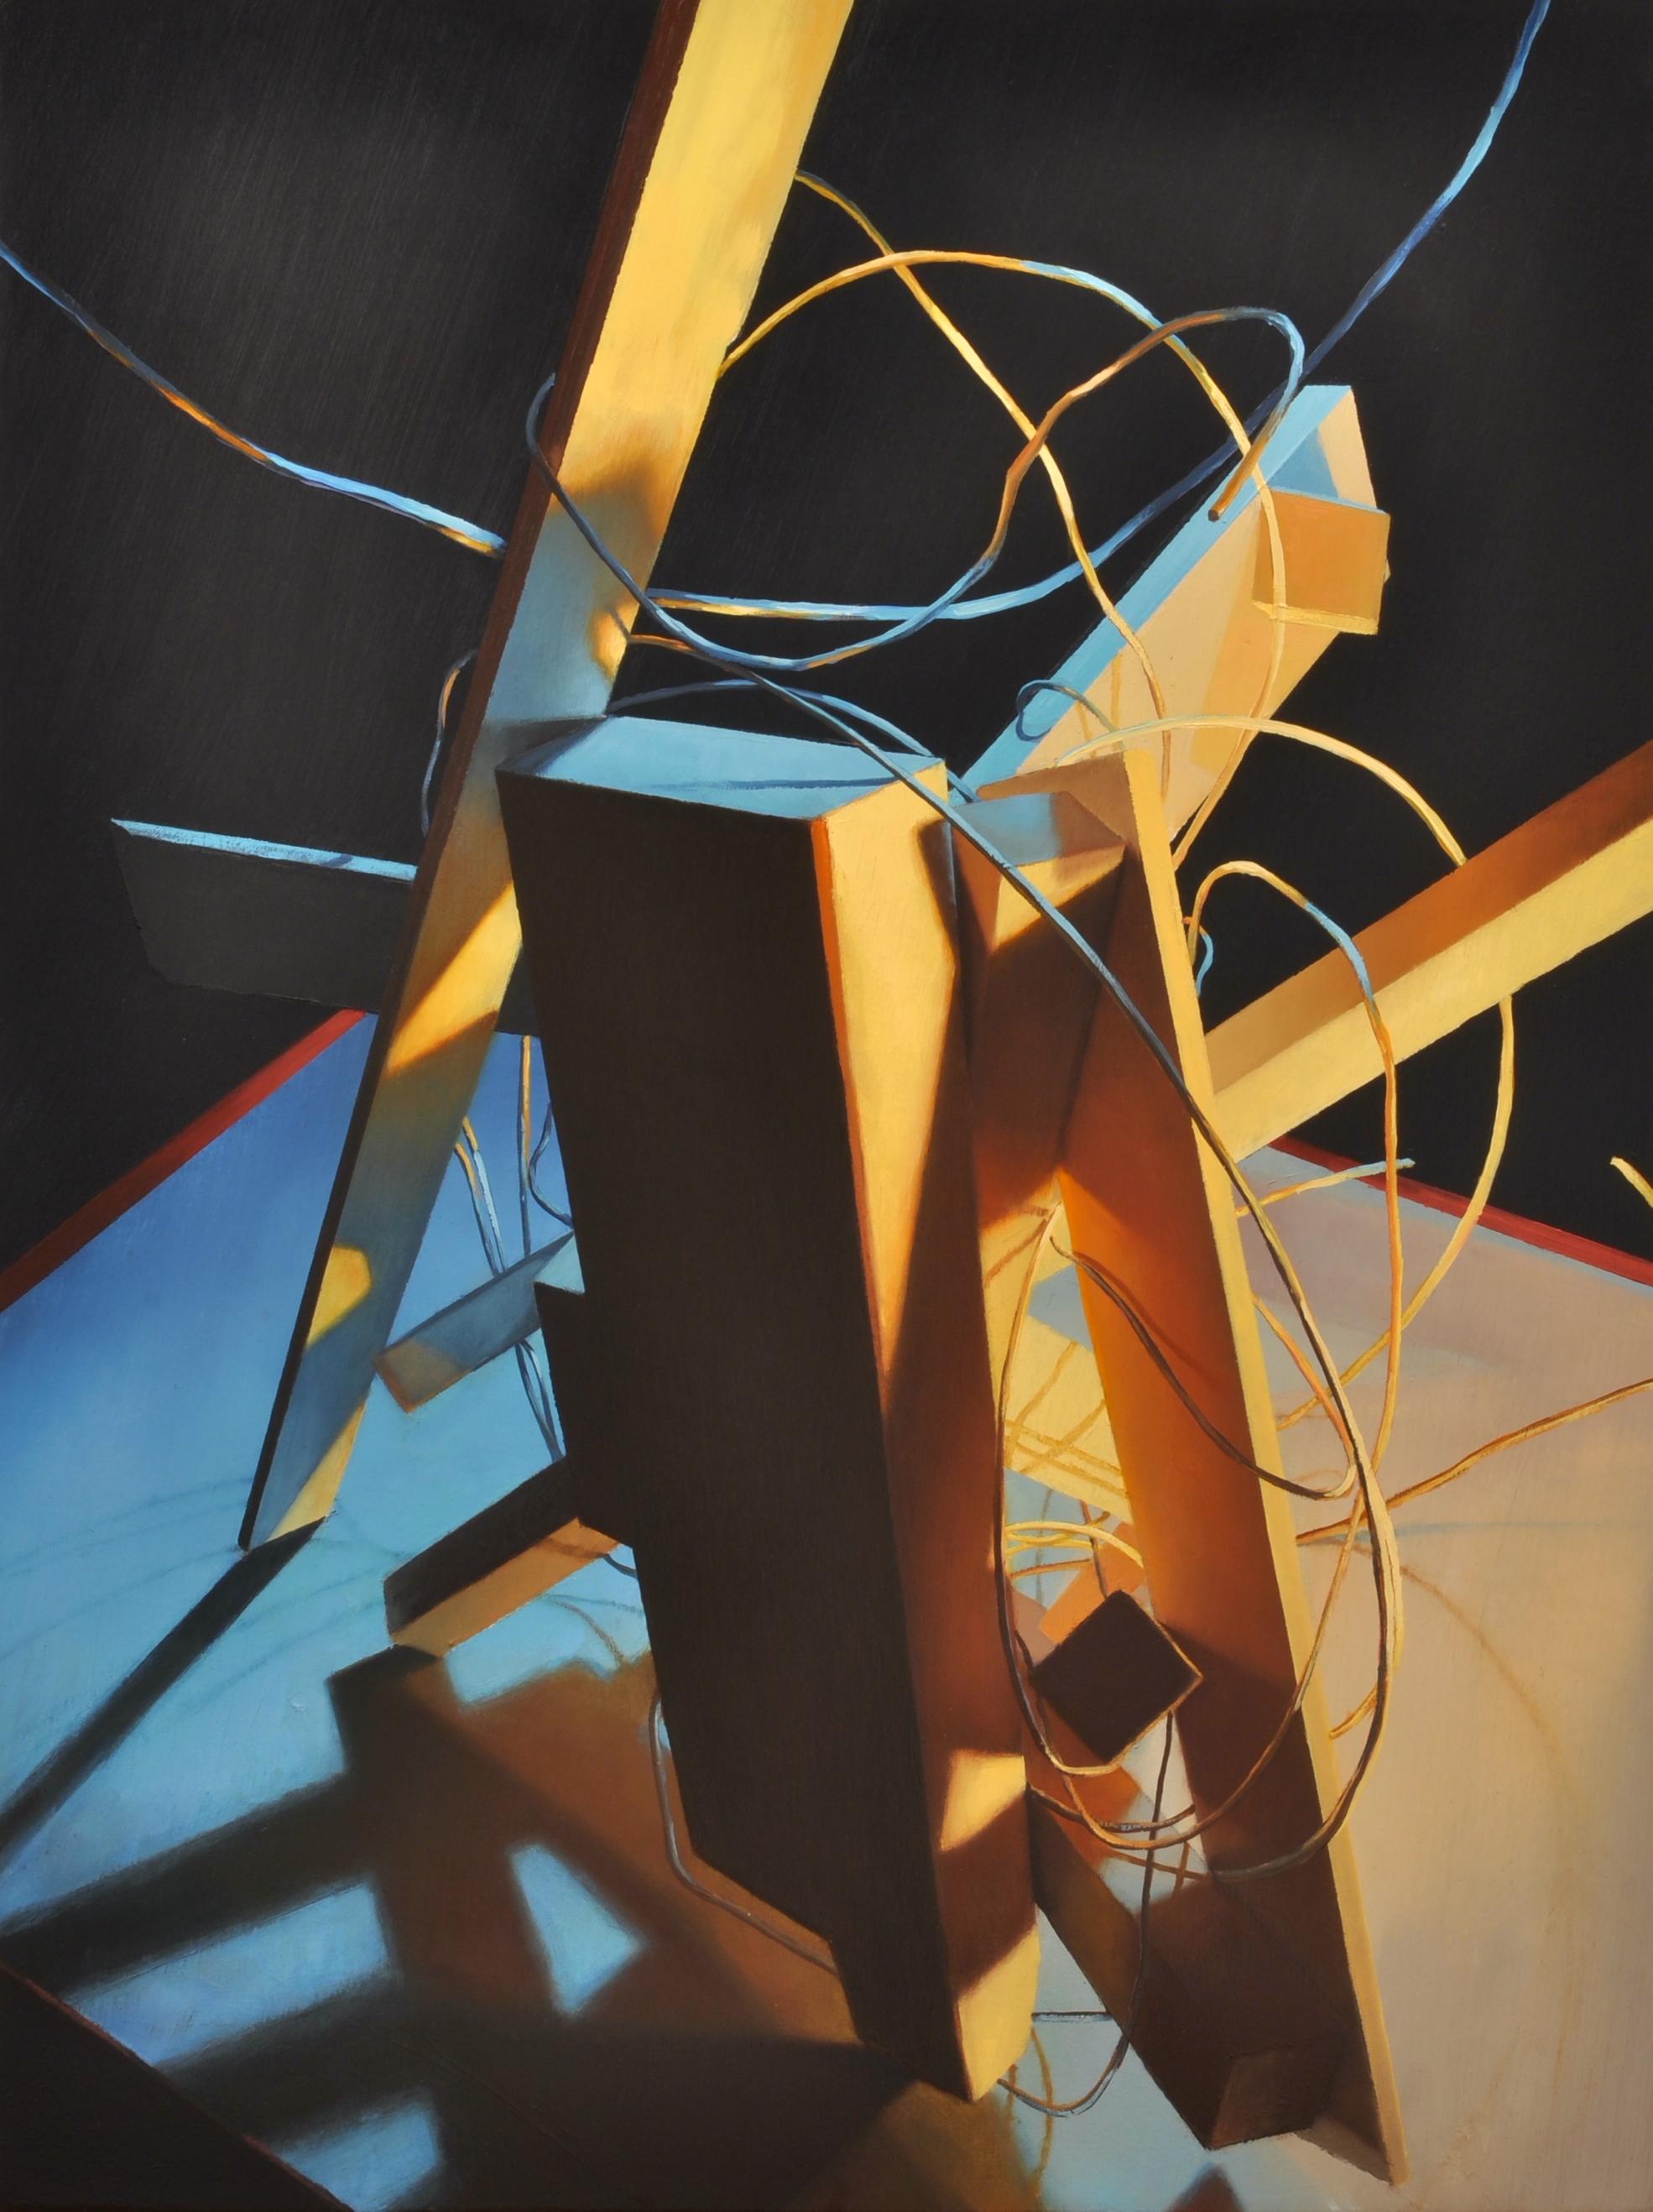 Donald Keefe Still-Life Painting - UNTITLED CONSTRUCT 1 - Abstract/Figurative Oil Painting in Yellow, Black & Blue